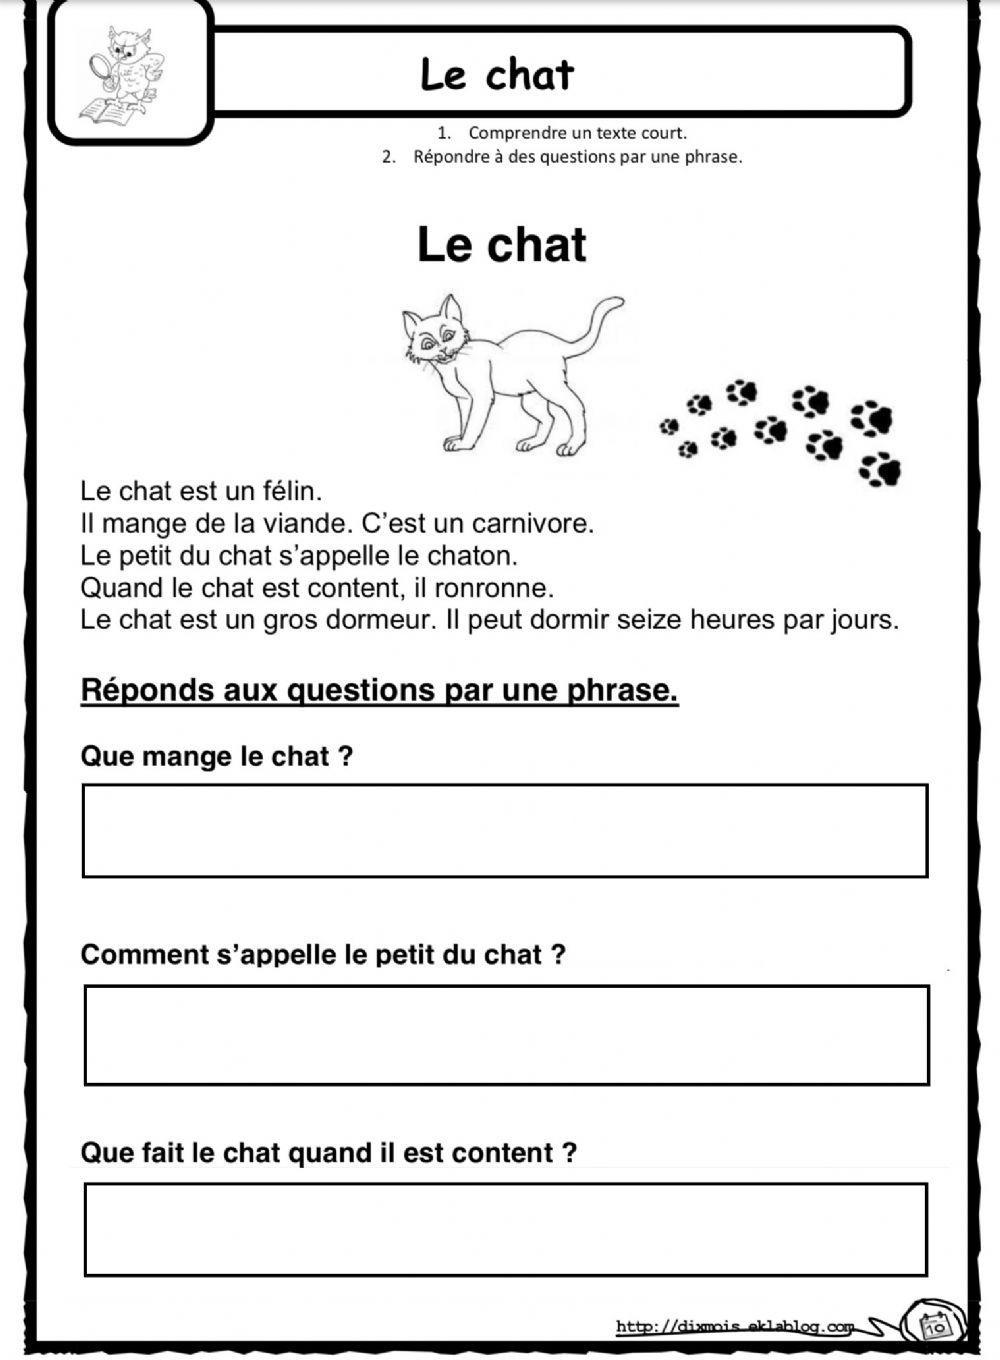 reading assignment traduction francais